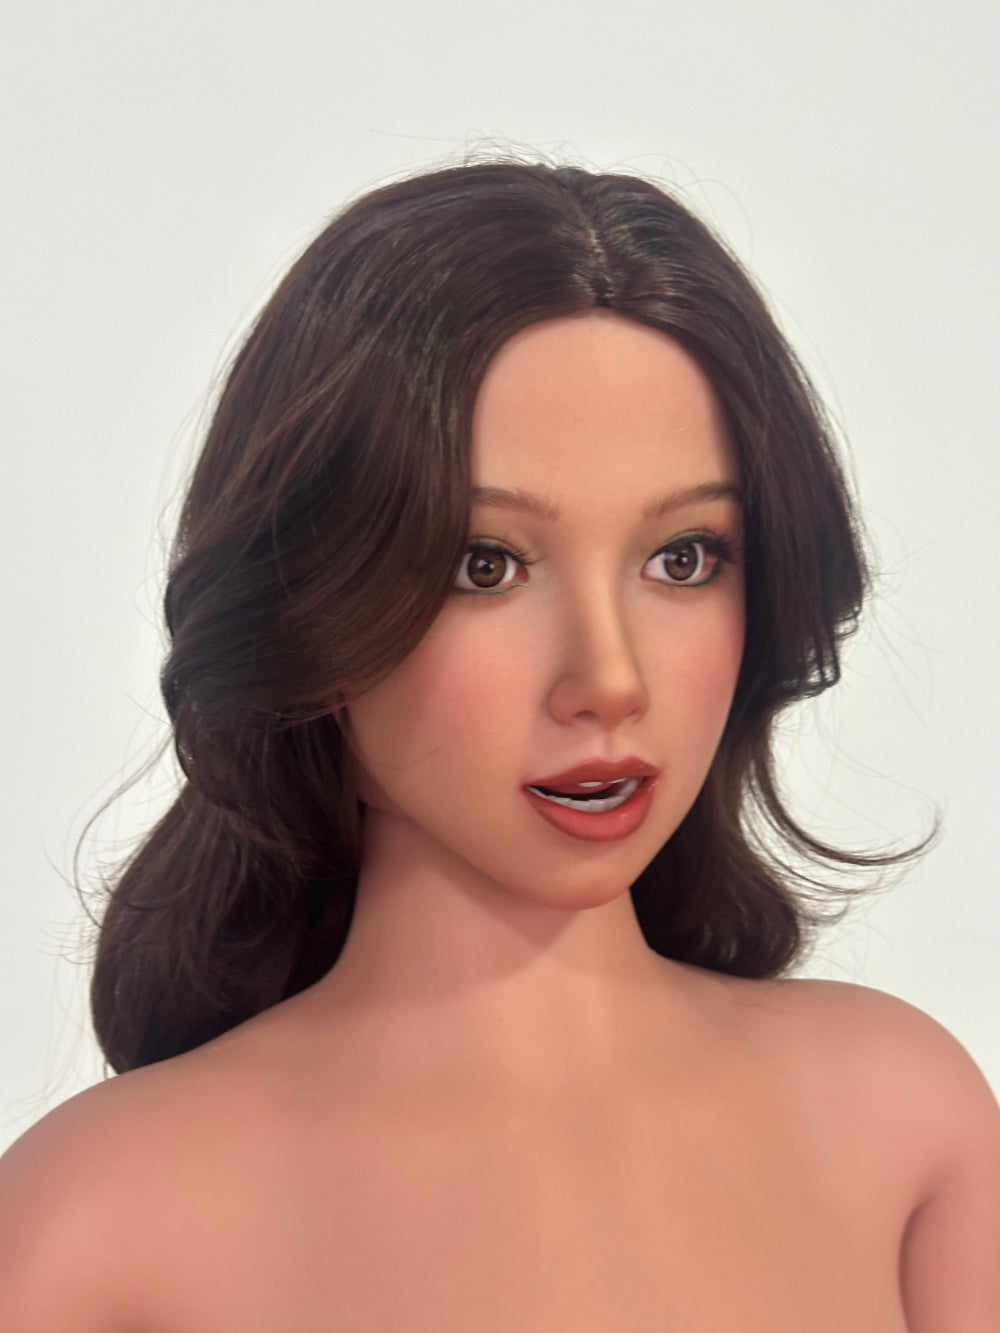 Zelex Doll SLE Series 165 cm D Silicone - ZXE209-2 Movable Jaw